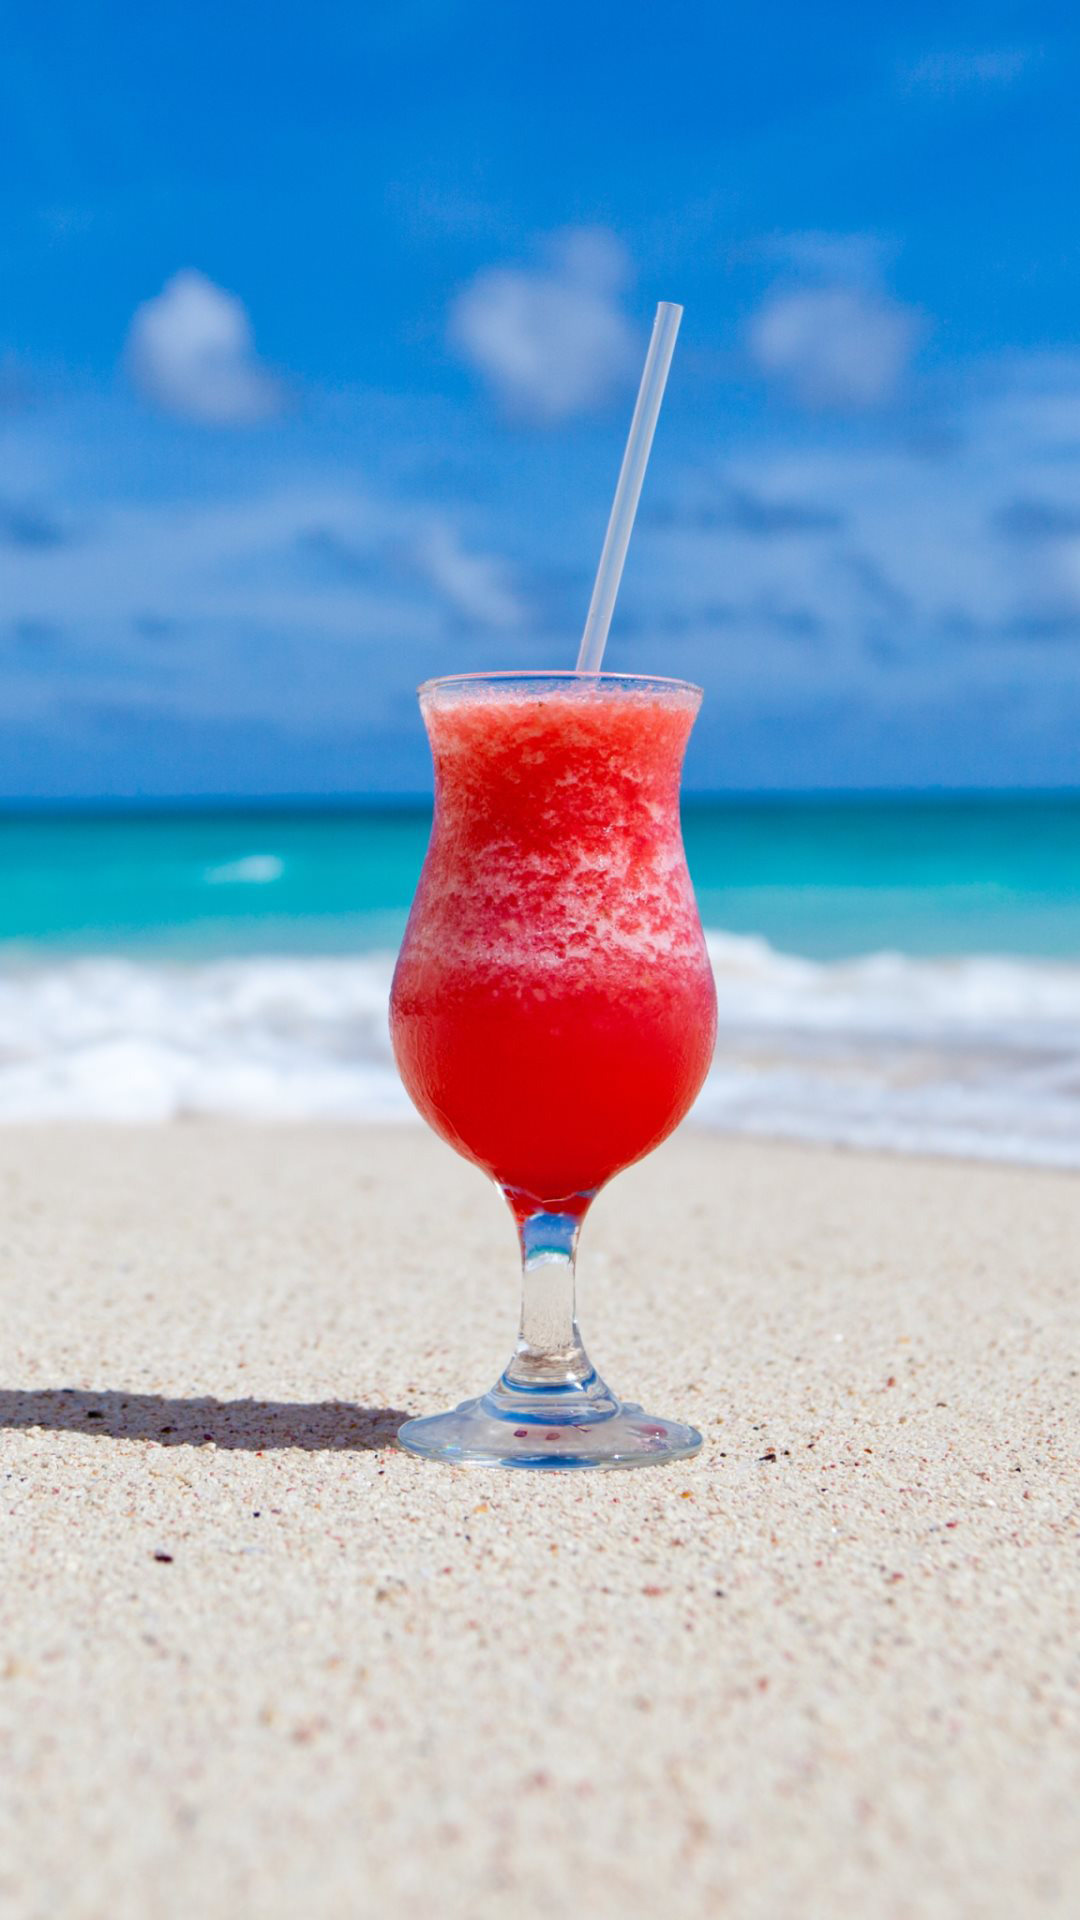 Exotic Cocktail Caribbean Beach Android Wallpaper free download